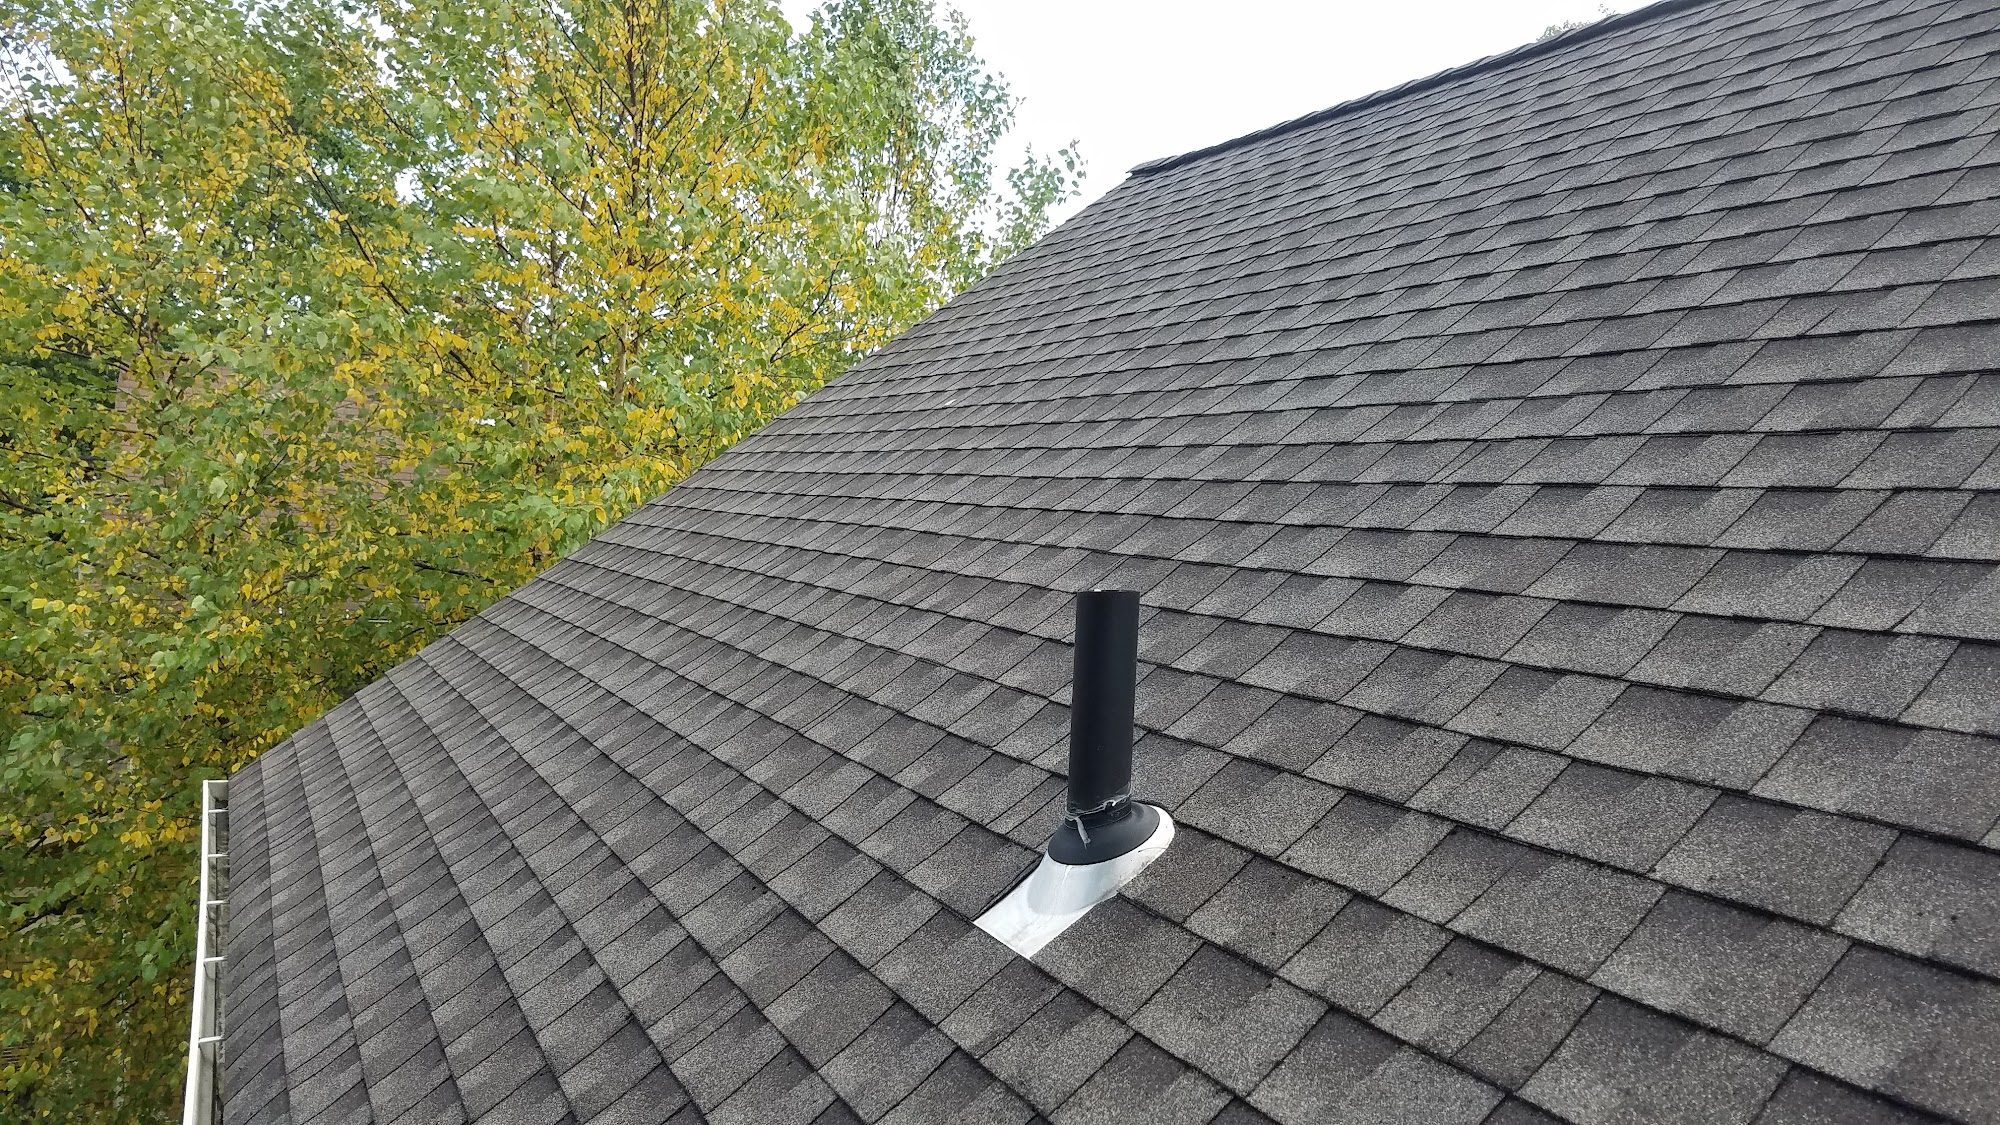 Superior Roof Cleaning